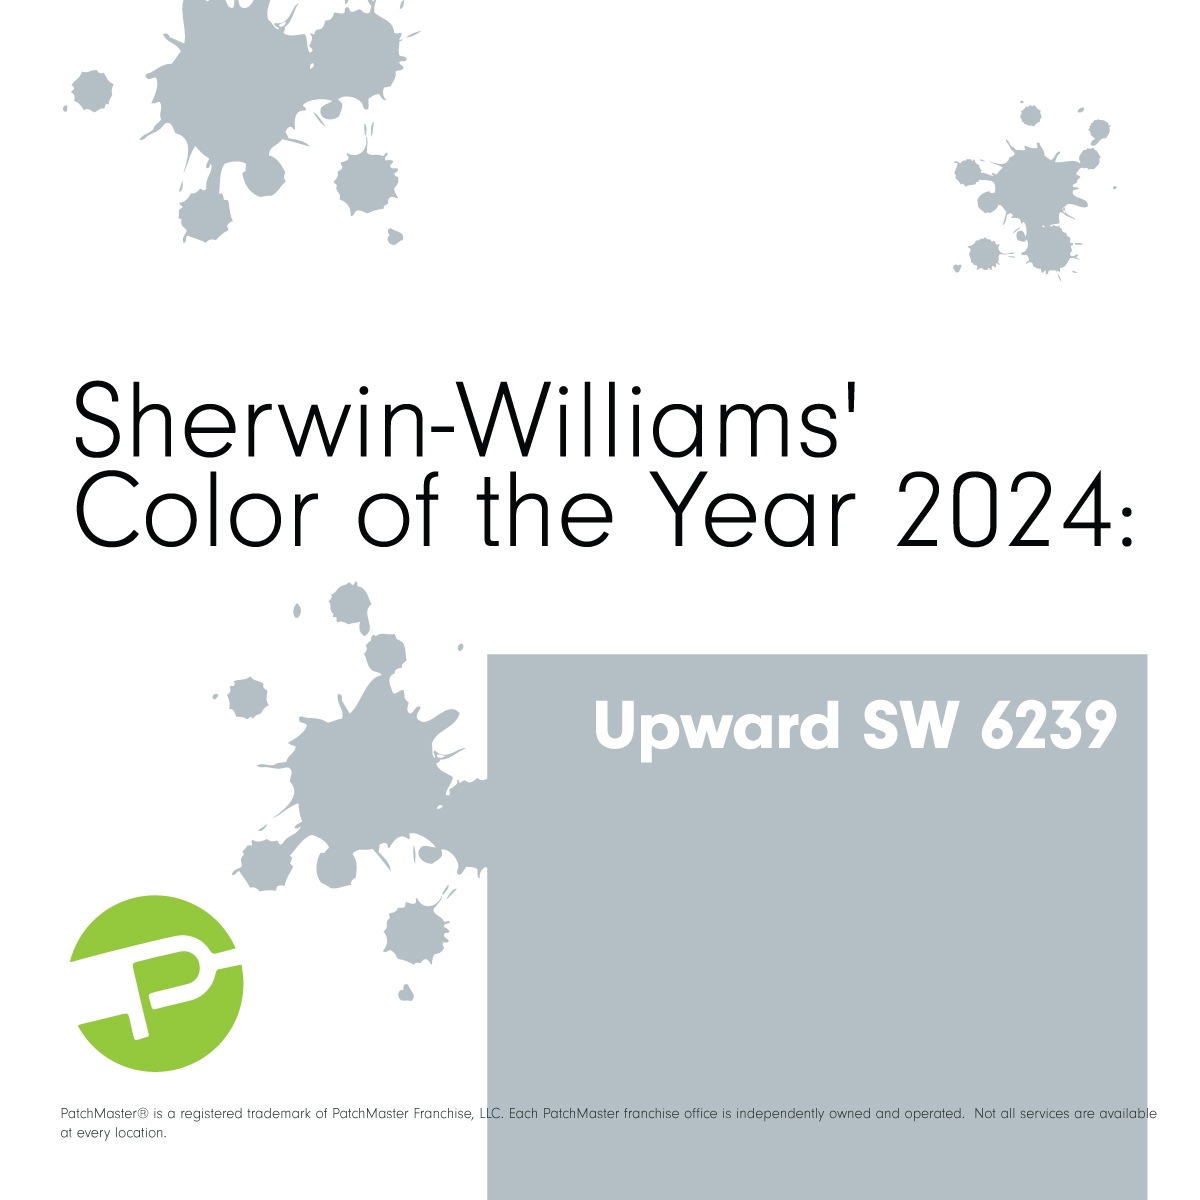 PatchMaster Preferred Partner, Sherwin-Williams' Color of the Year 2024: Upward SW 6239